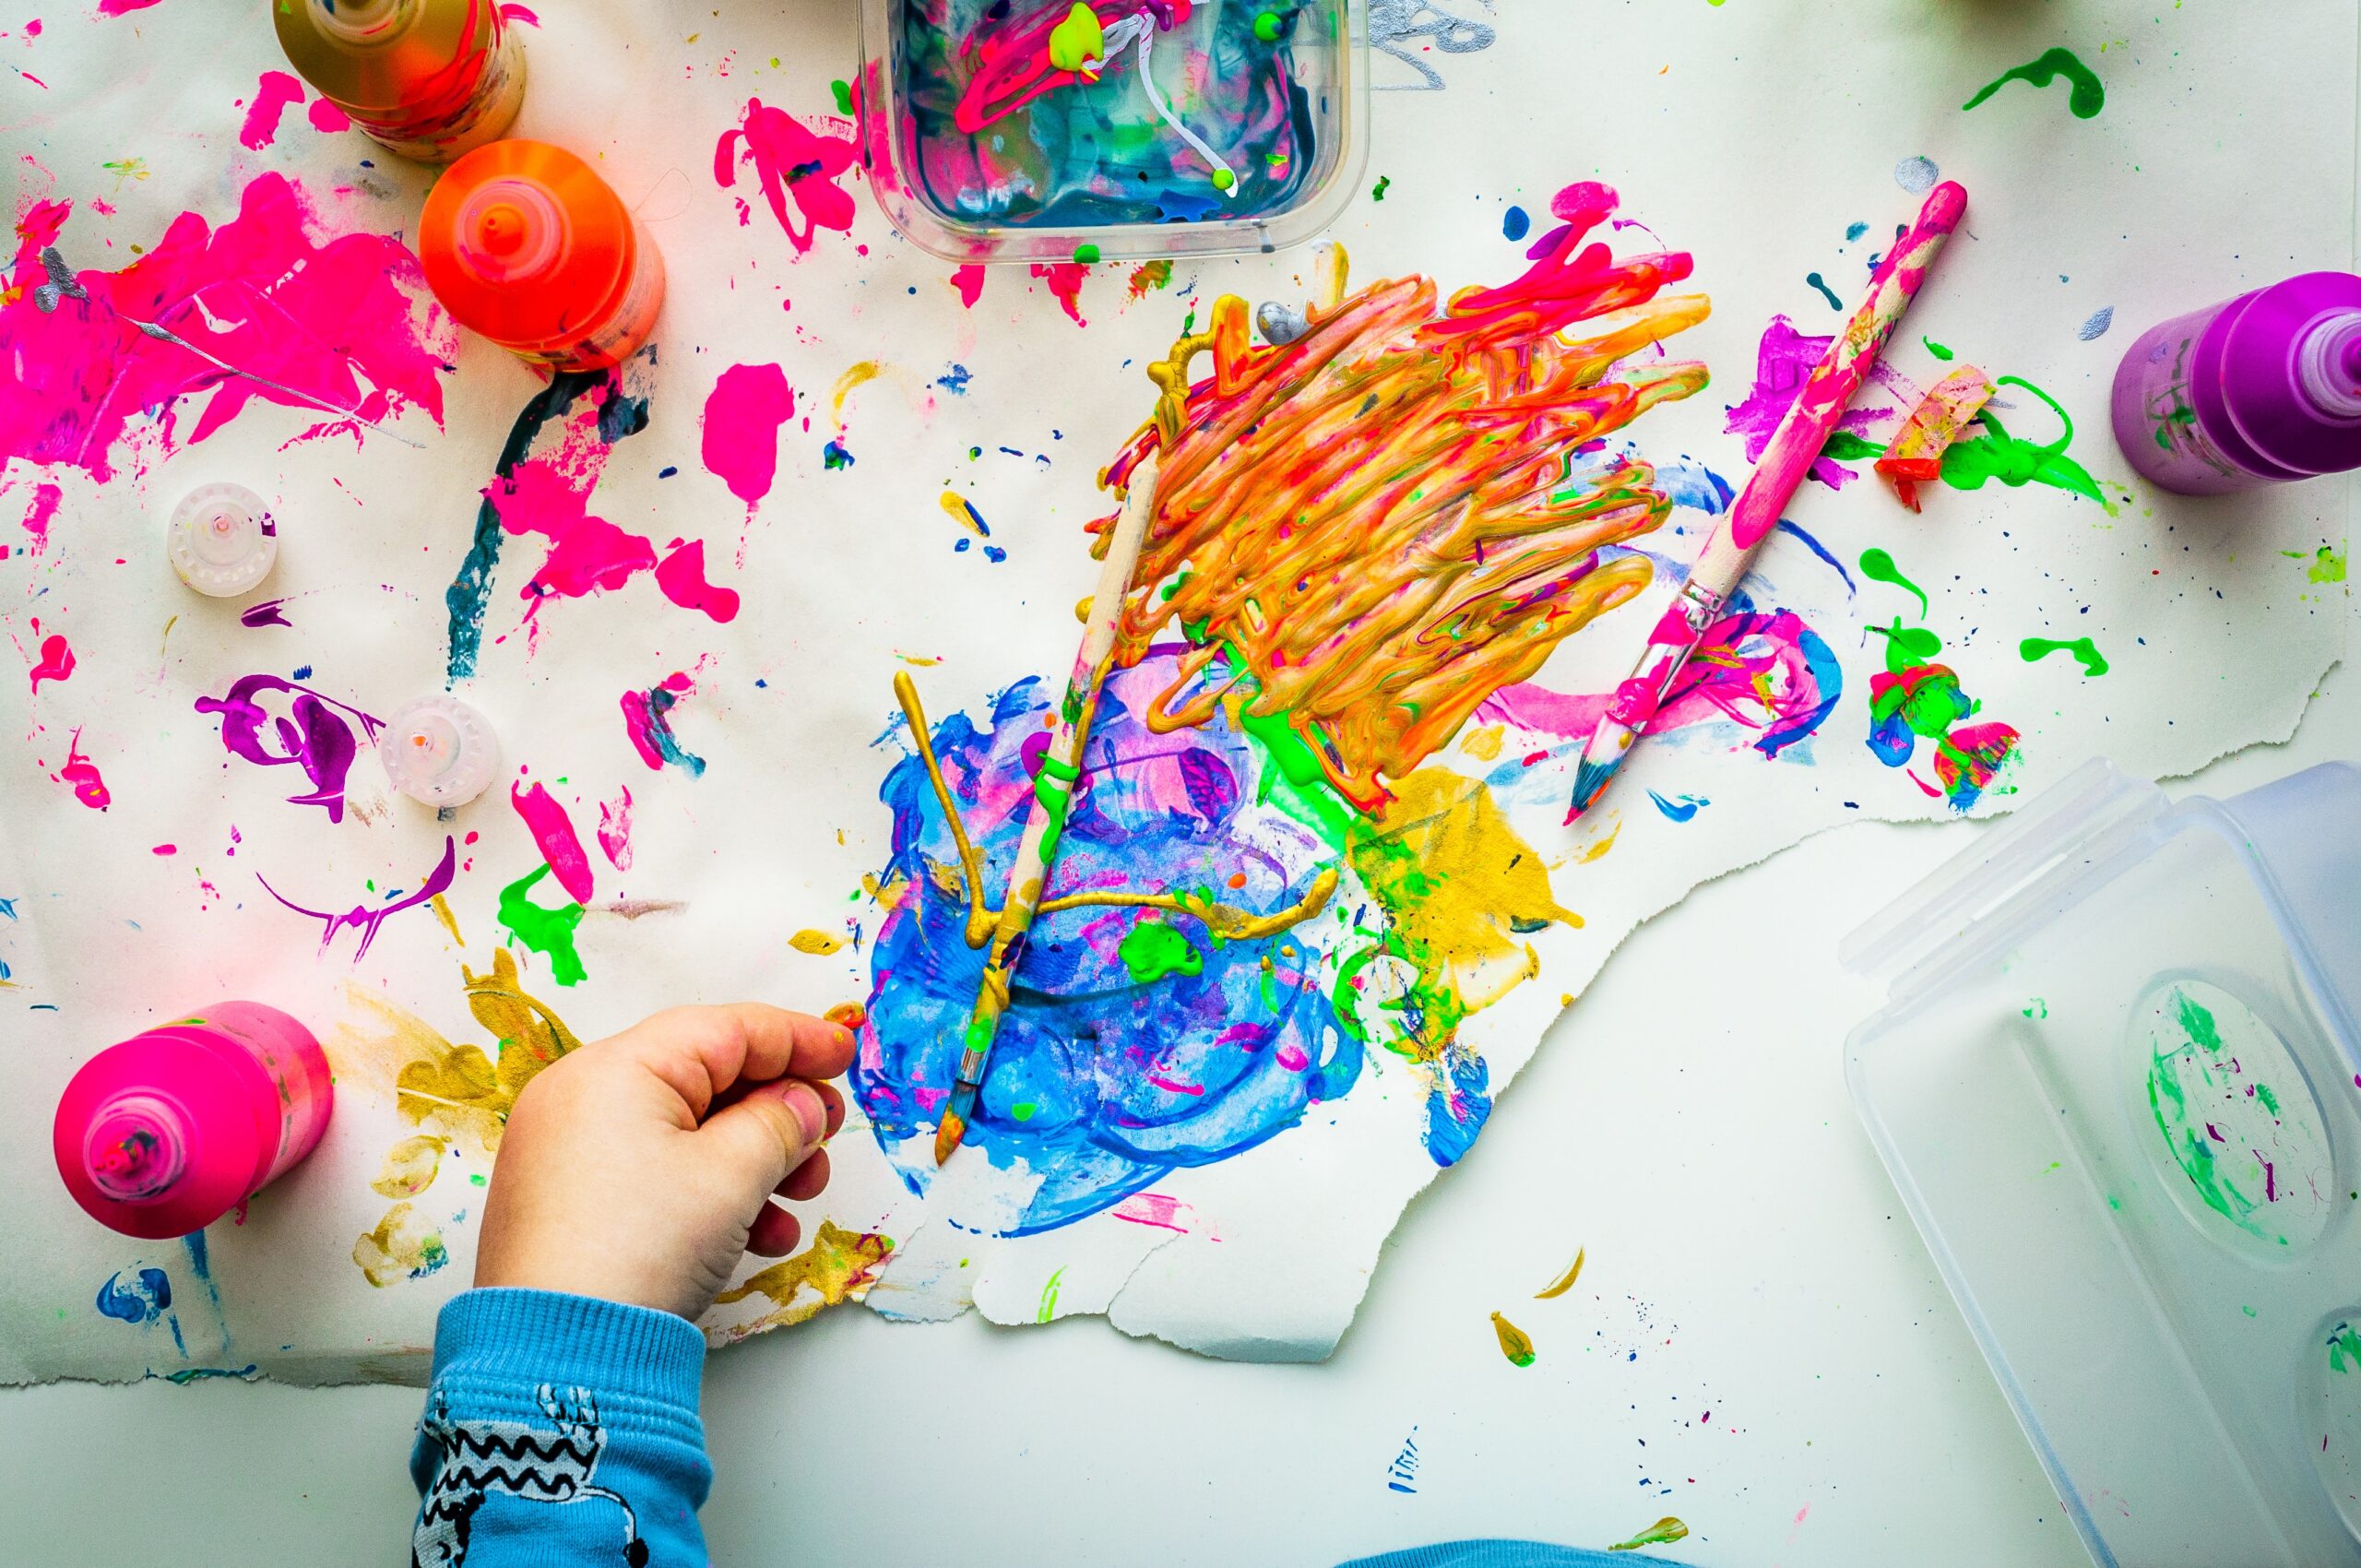 The benefits of art making for kids - Play Kettering